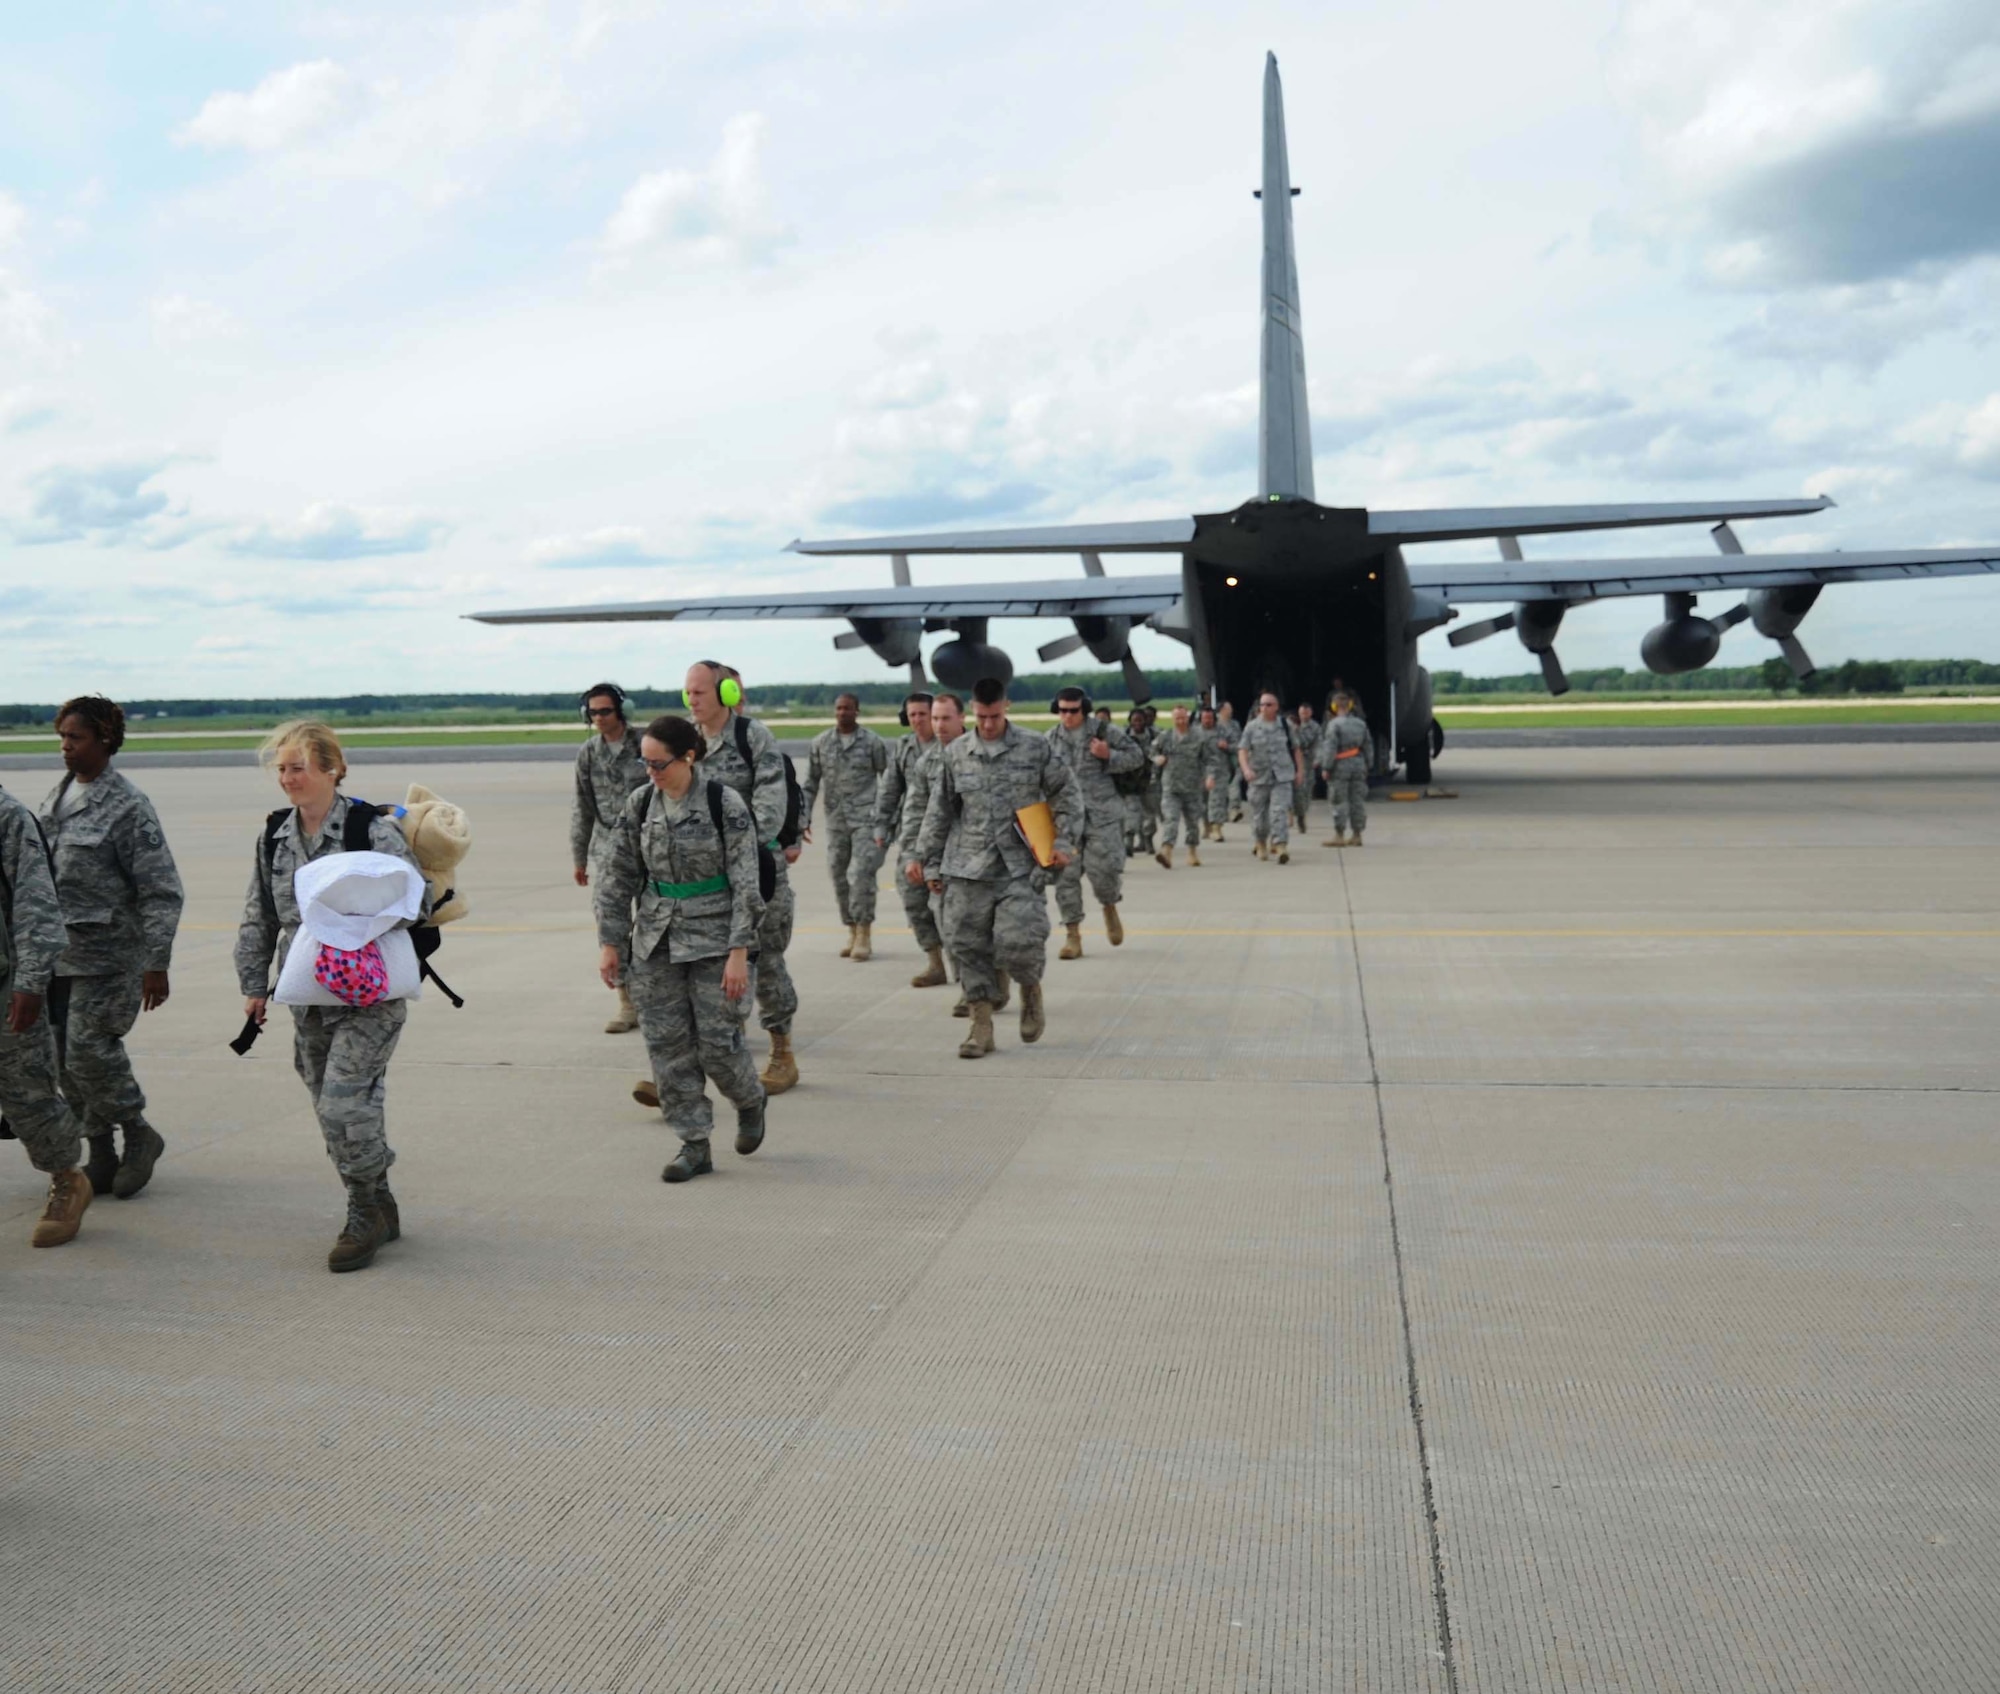 First arrivals from Pope Air Force Base deplane from  a 440th Airlift Wing C-130 at Volk Field.  Many of the Reservists are part of the advanced team who will prepare the Volk Field training site for ORTP IV. Joining the 440th team will be members of the 916th Air Refueling Wing and the 71st Aerial Port Squadron. More than 400 Reservists will be at Volk Field for the next  five days practicing the skills required to successfully pass the upcoming Operational Readiness Inspection early next year. (Air Force photo by Jerry Green)